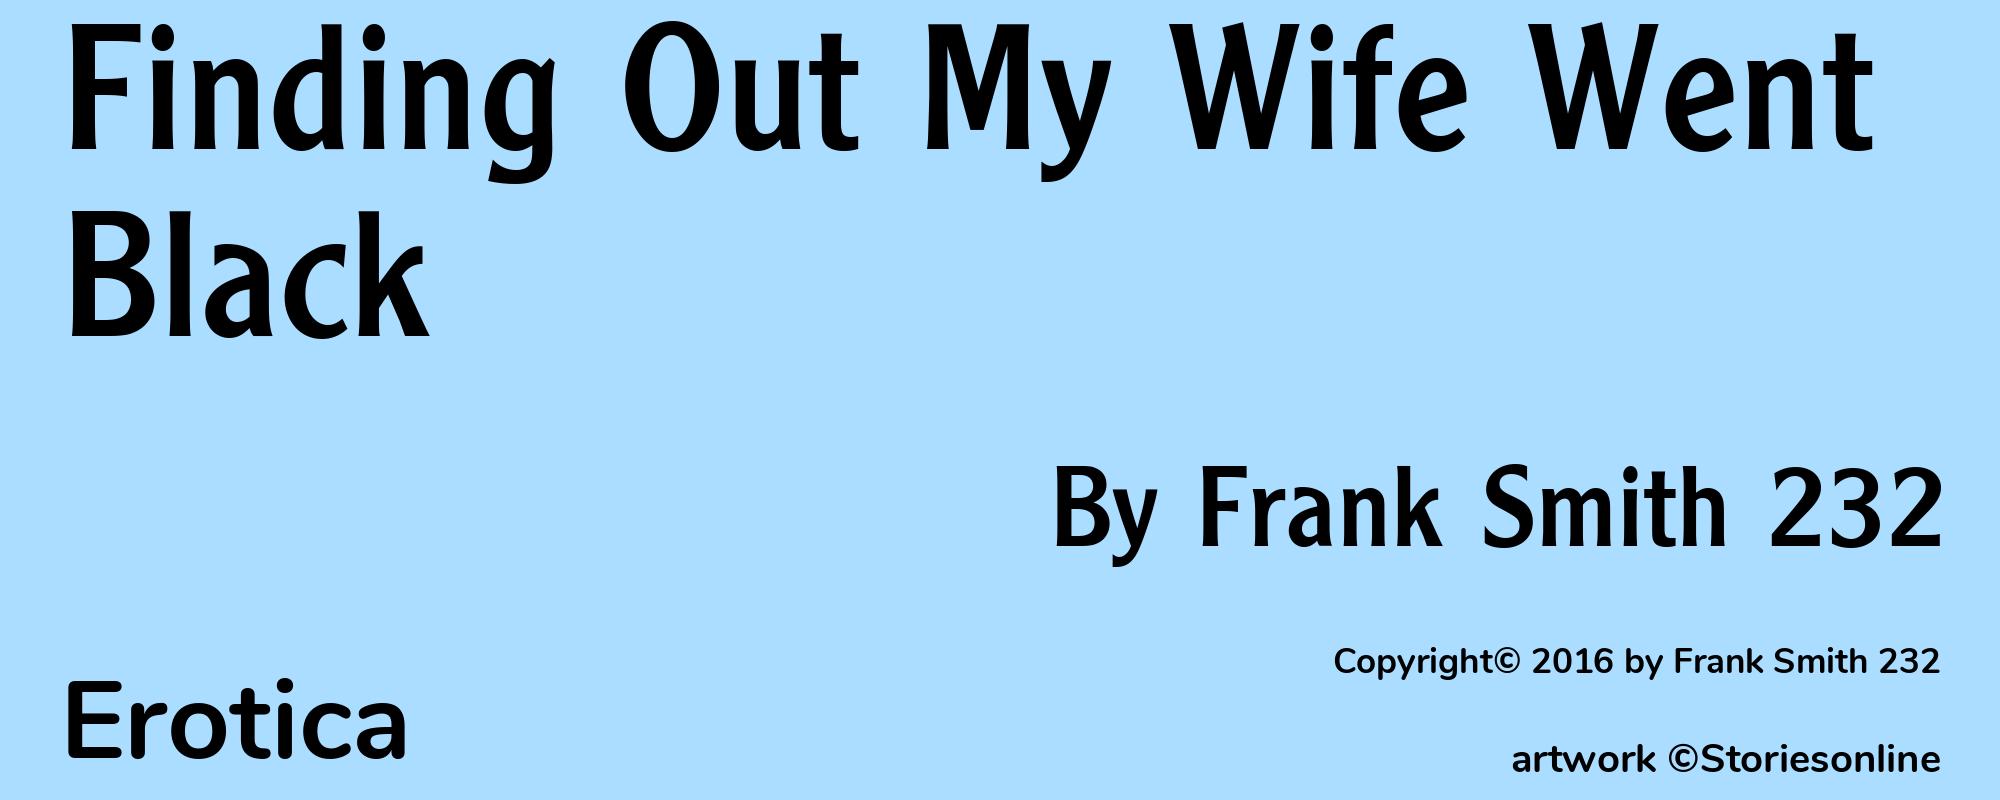 Finding Out My Wife Went Black - Cover